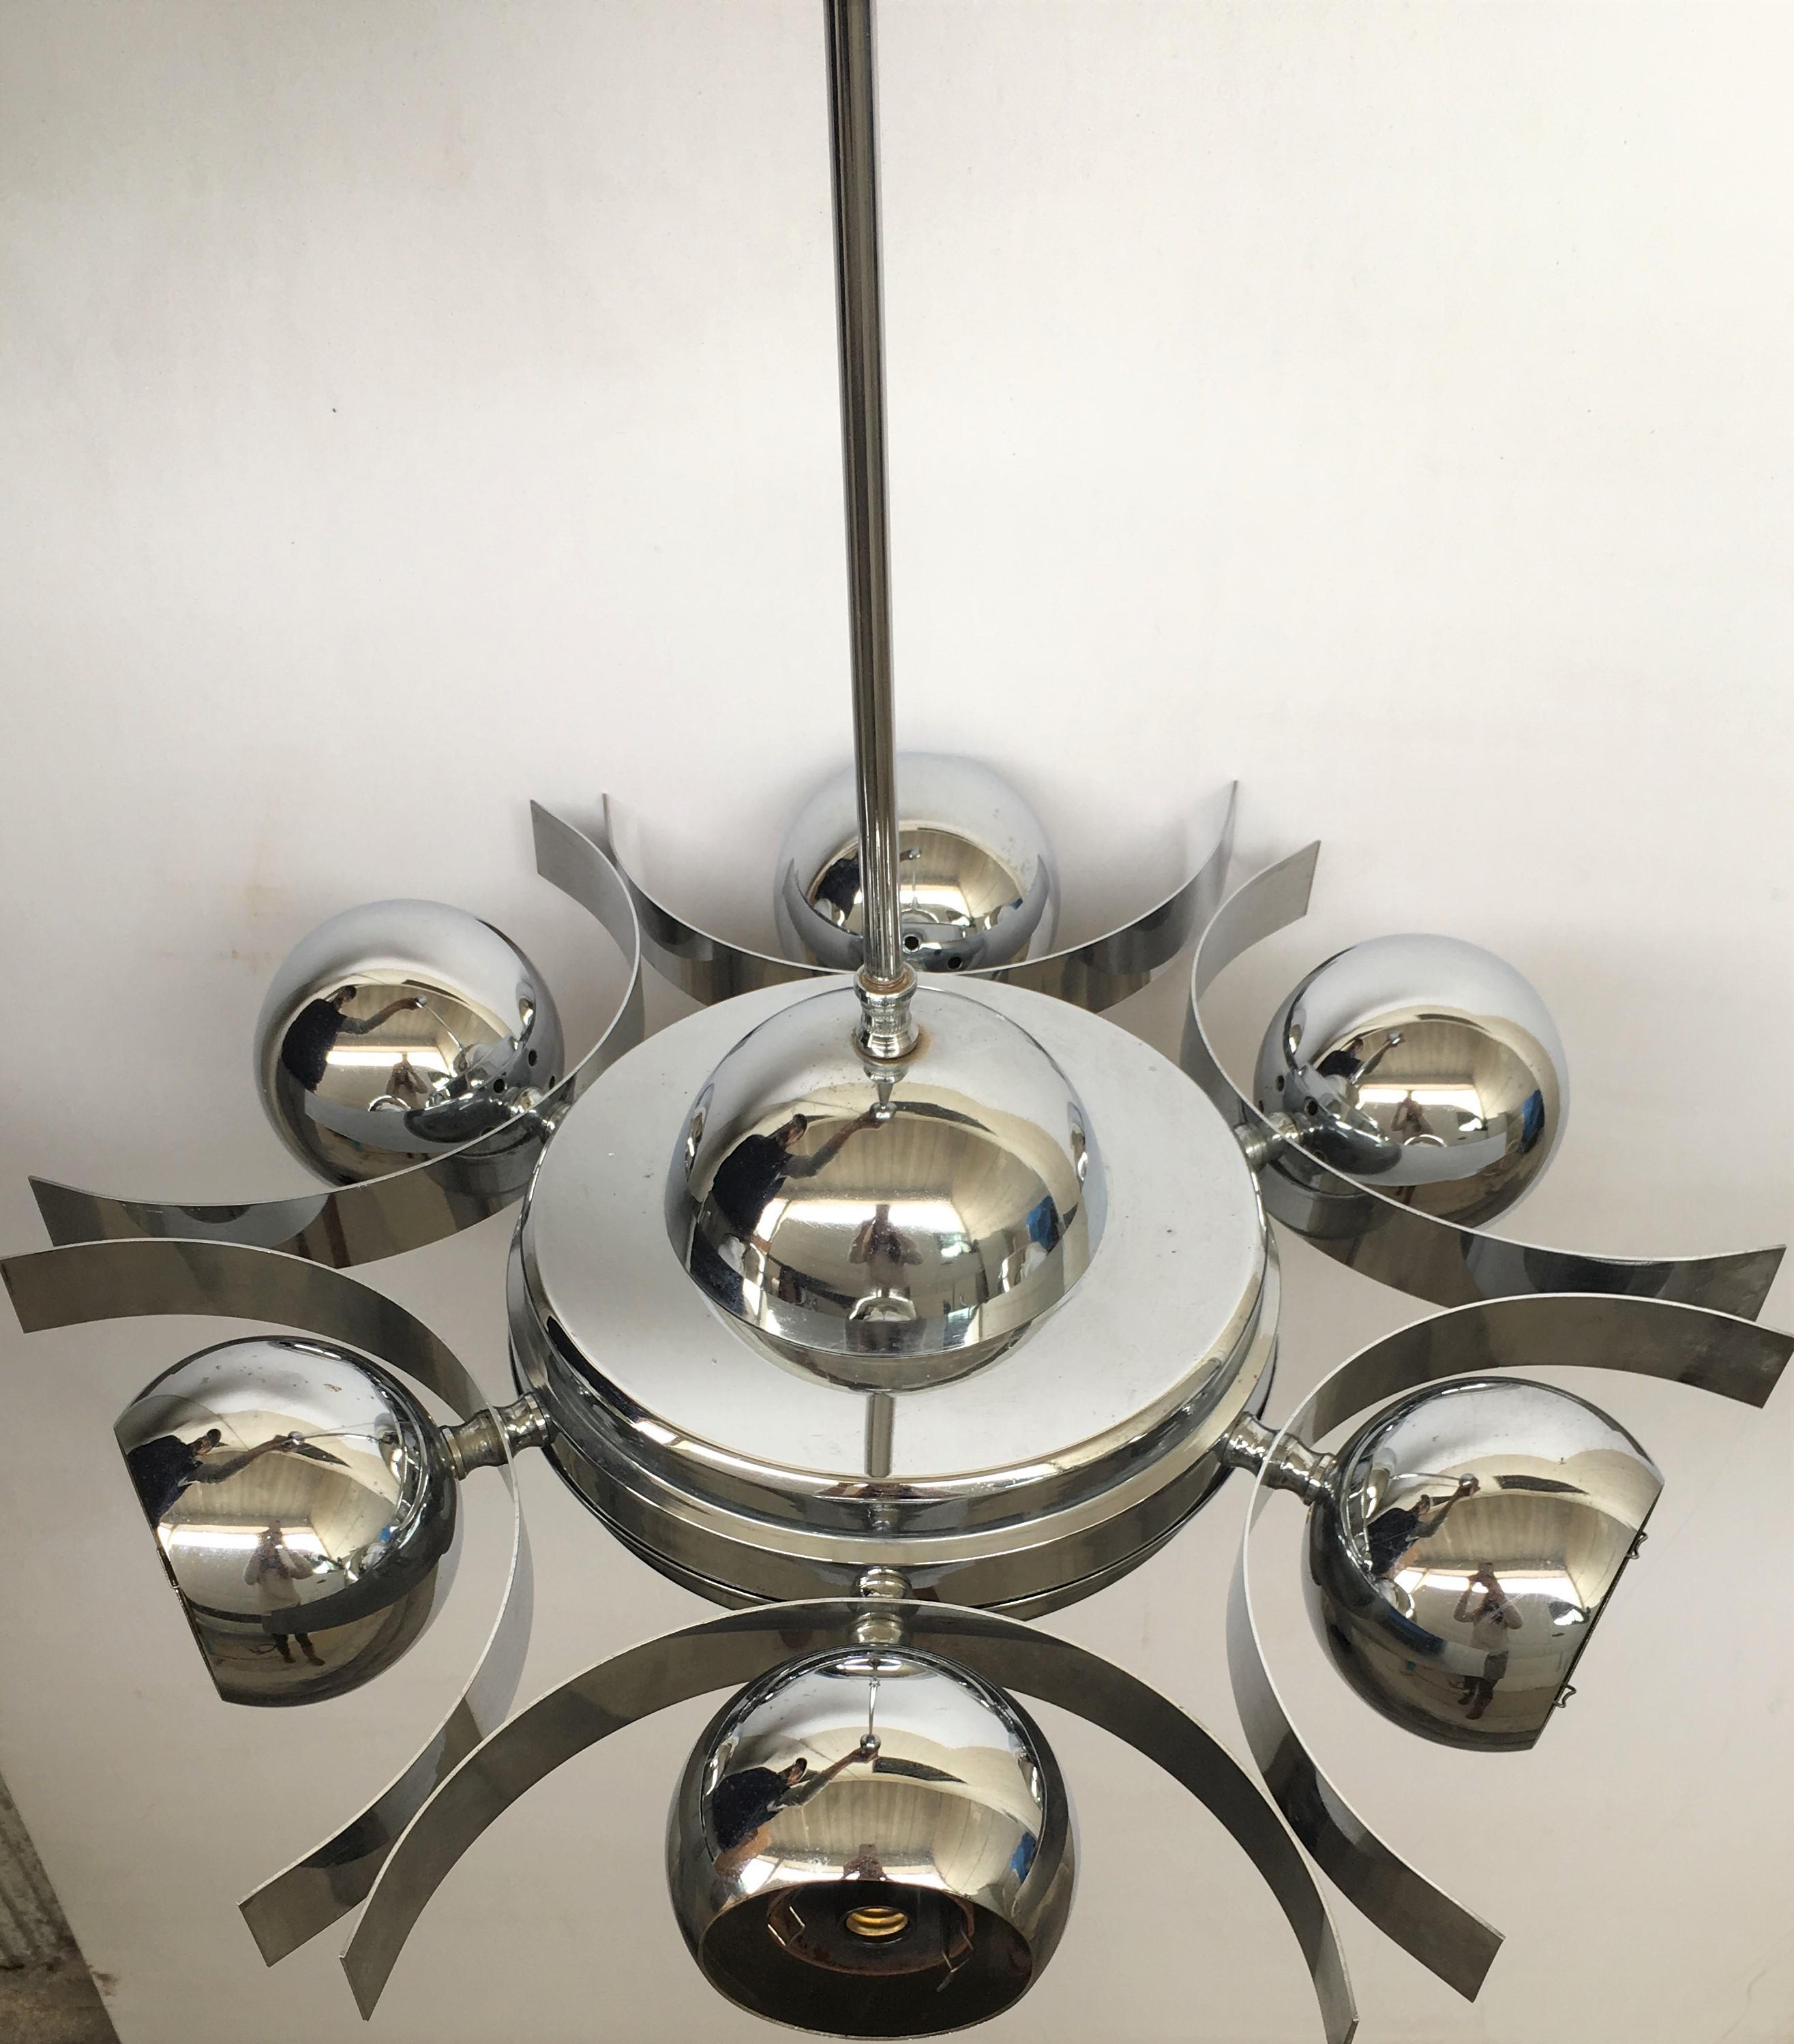 Italian Pop Art Space Age chrome ceiling lamp with six spheres, 1960s.
  